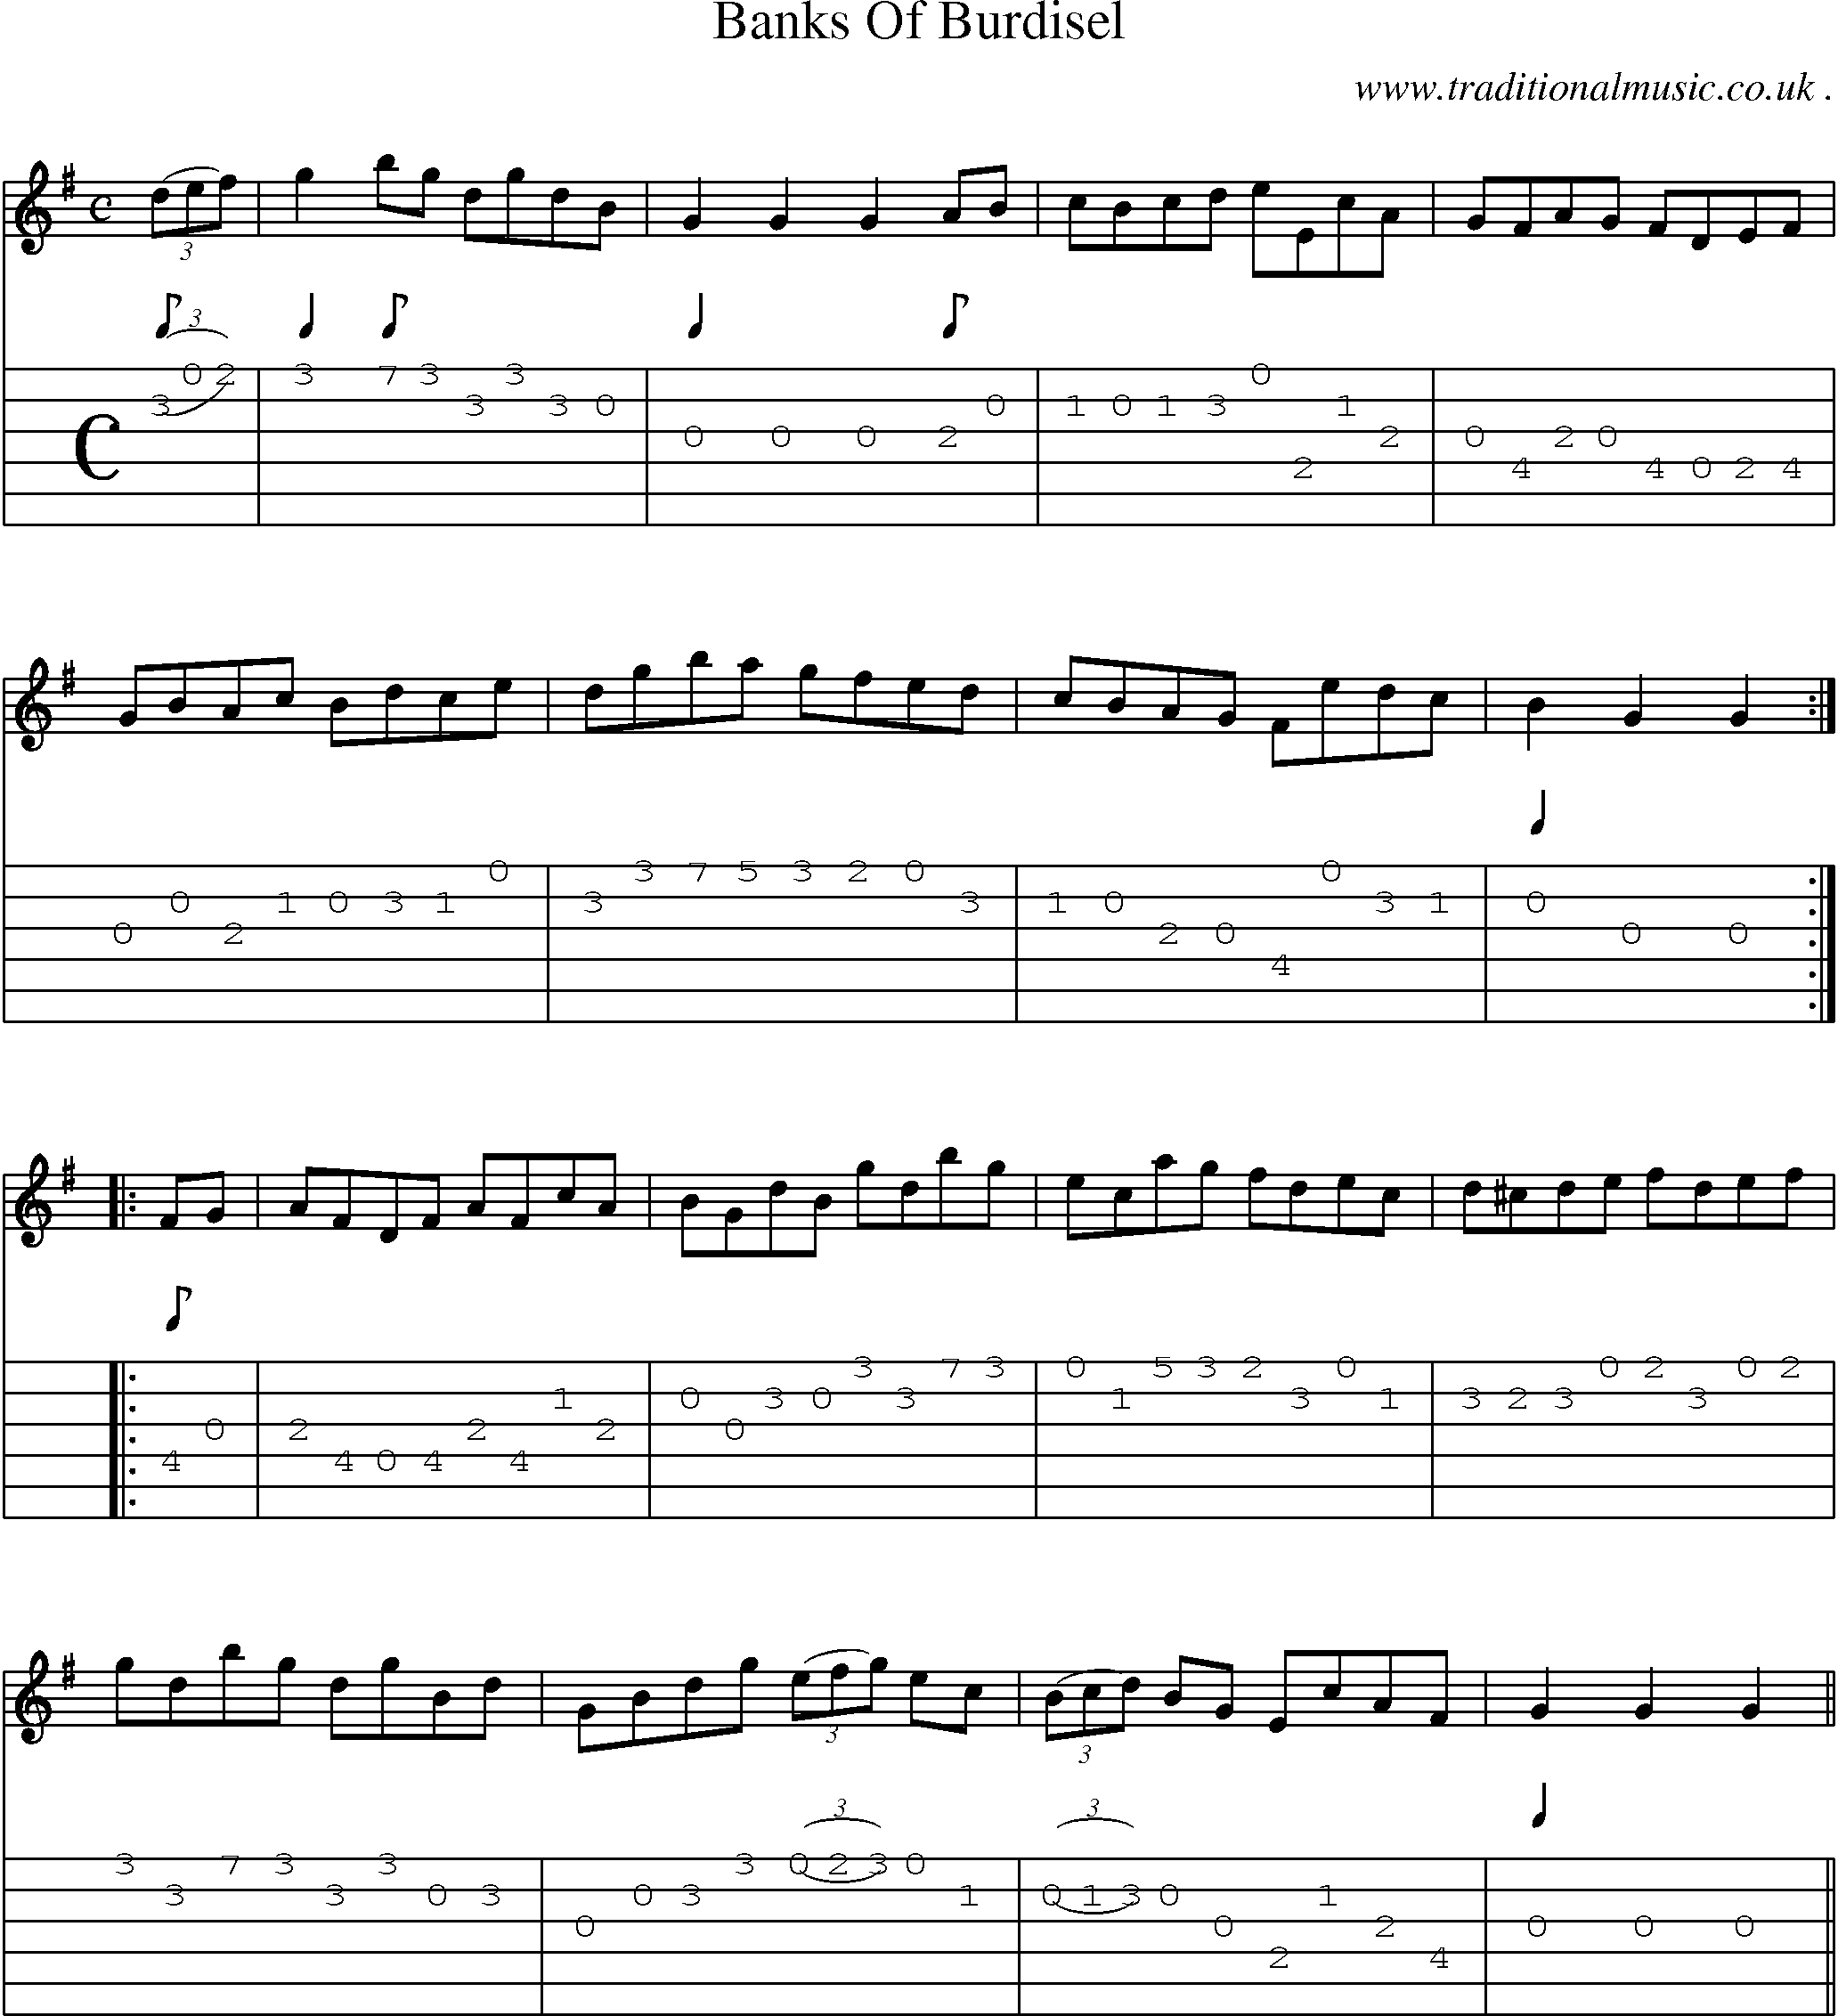 Sheet-Music and Guitar Tabs for Banks Of Burdisel